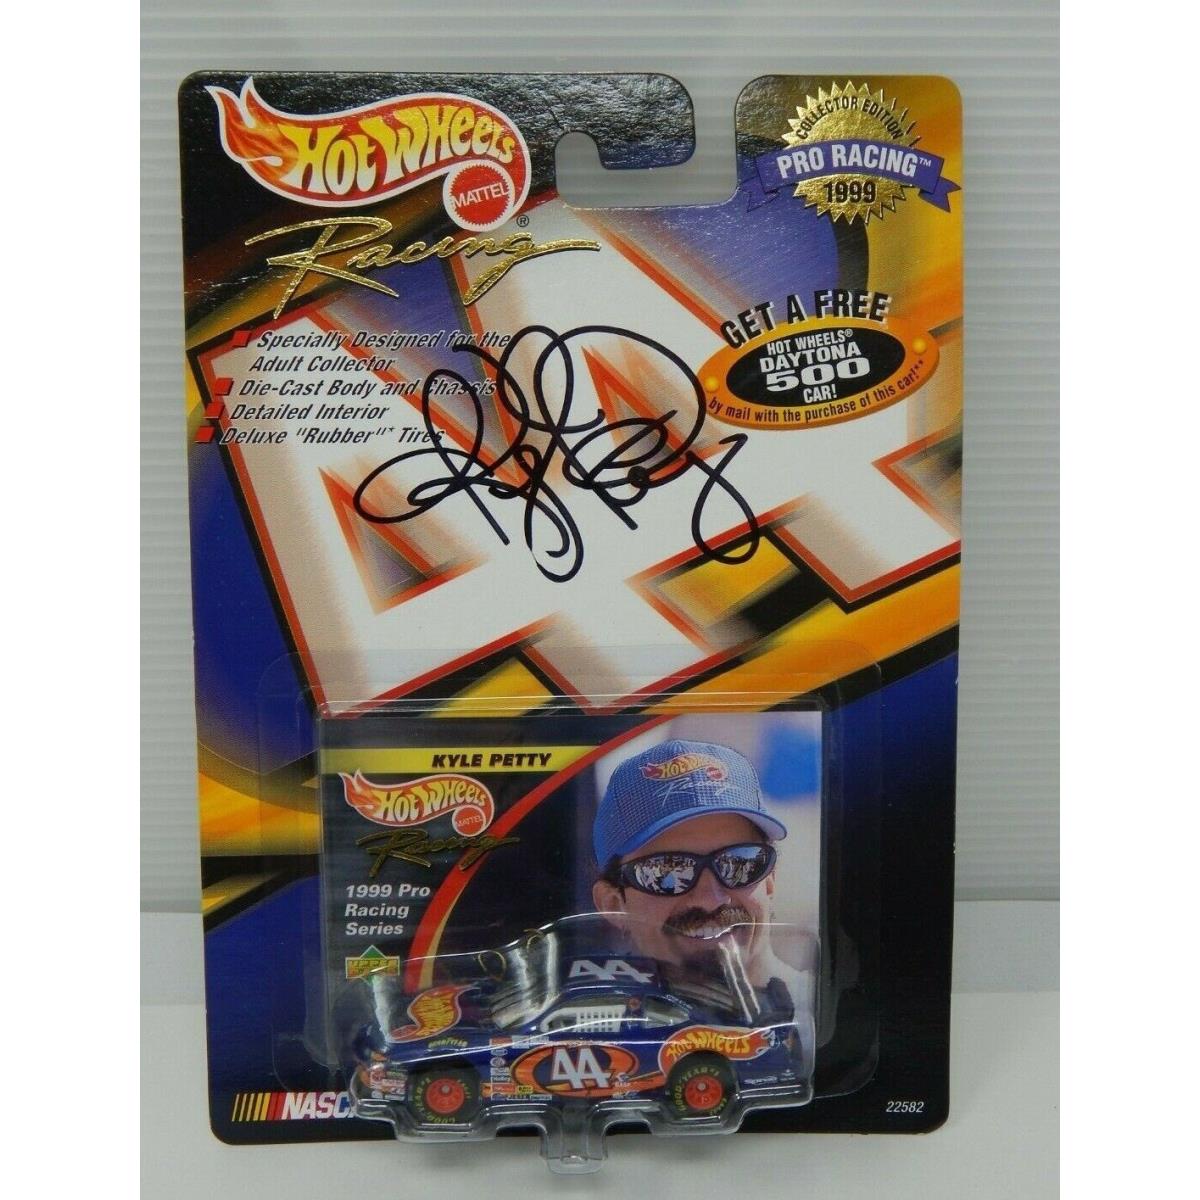 Hot Wheels Pro Racing 1999 Kyle Petty Signed